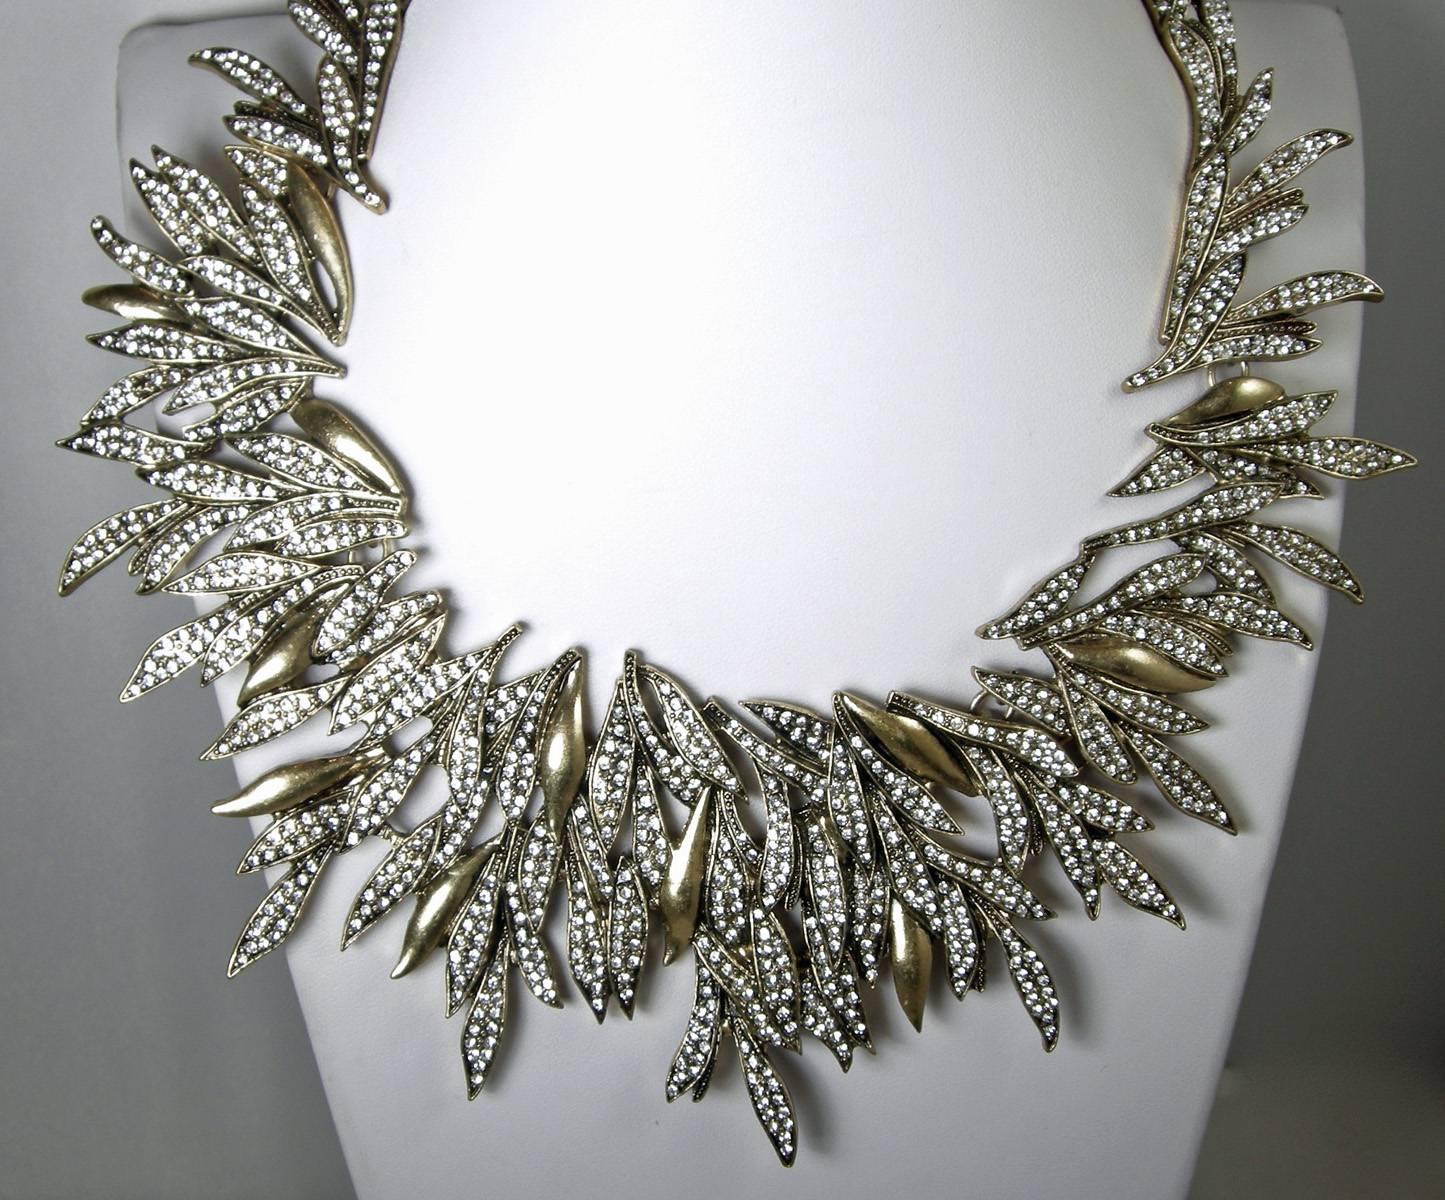 This elegant Oscar de la Renta is an important statement necklace. It is designed in an intricate motif of cascading Austrian crystals leaves in a gold tone setting. It is simply dazzling with its fabulous pave crystal leaves. The necklace lays